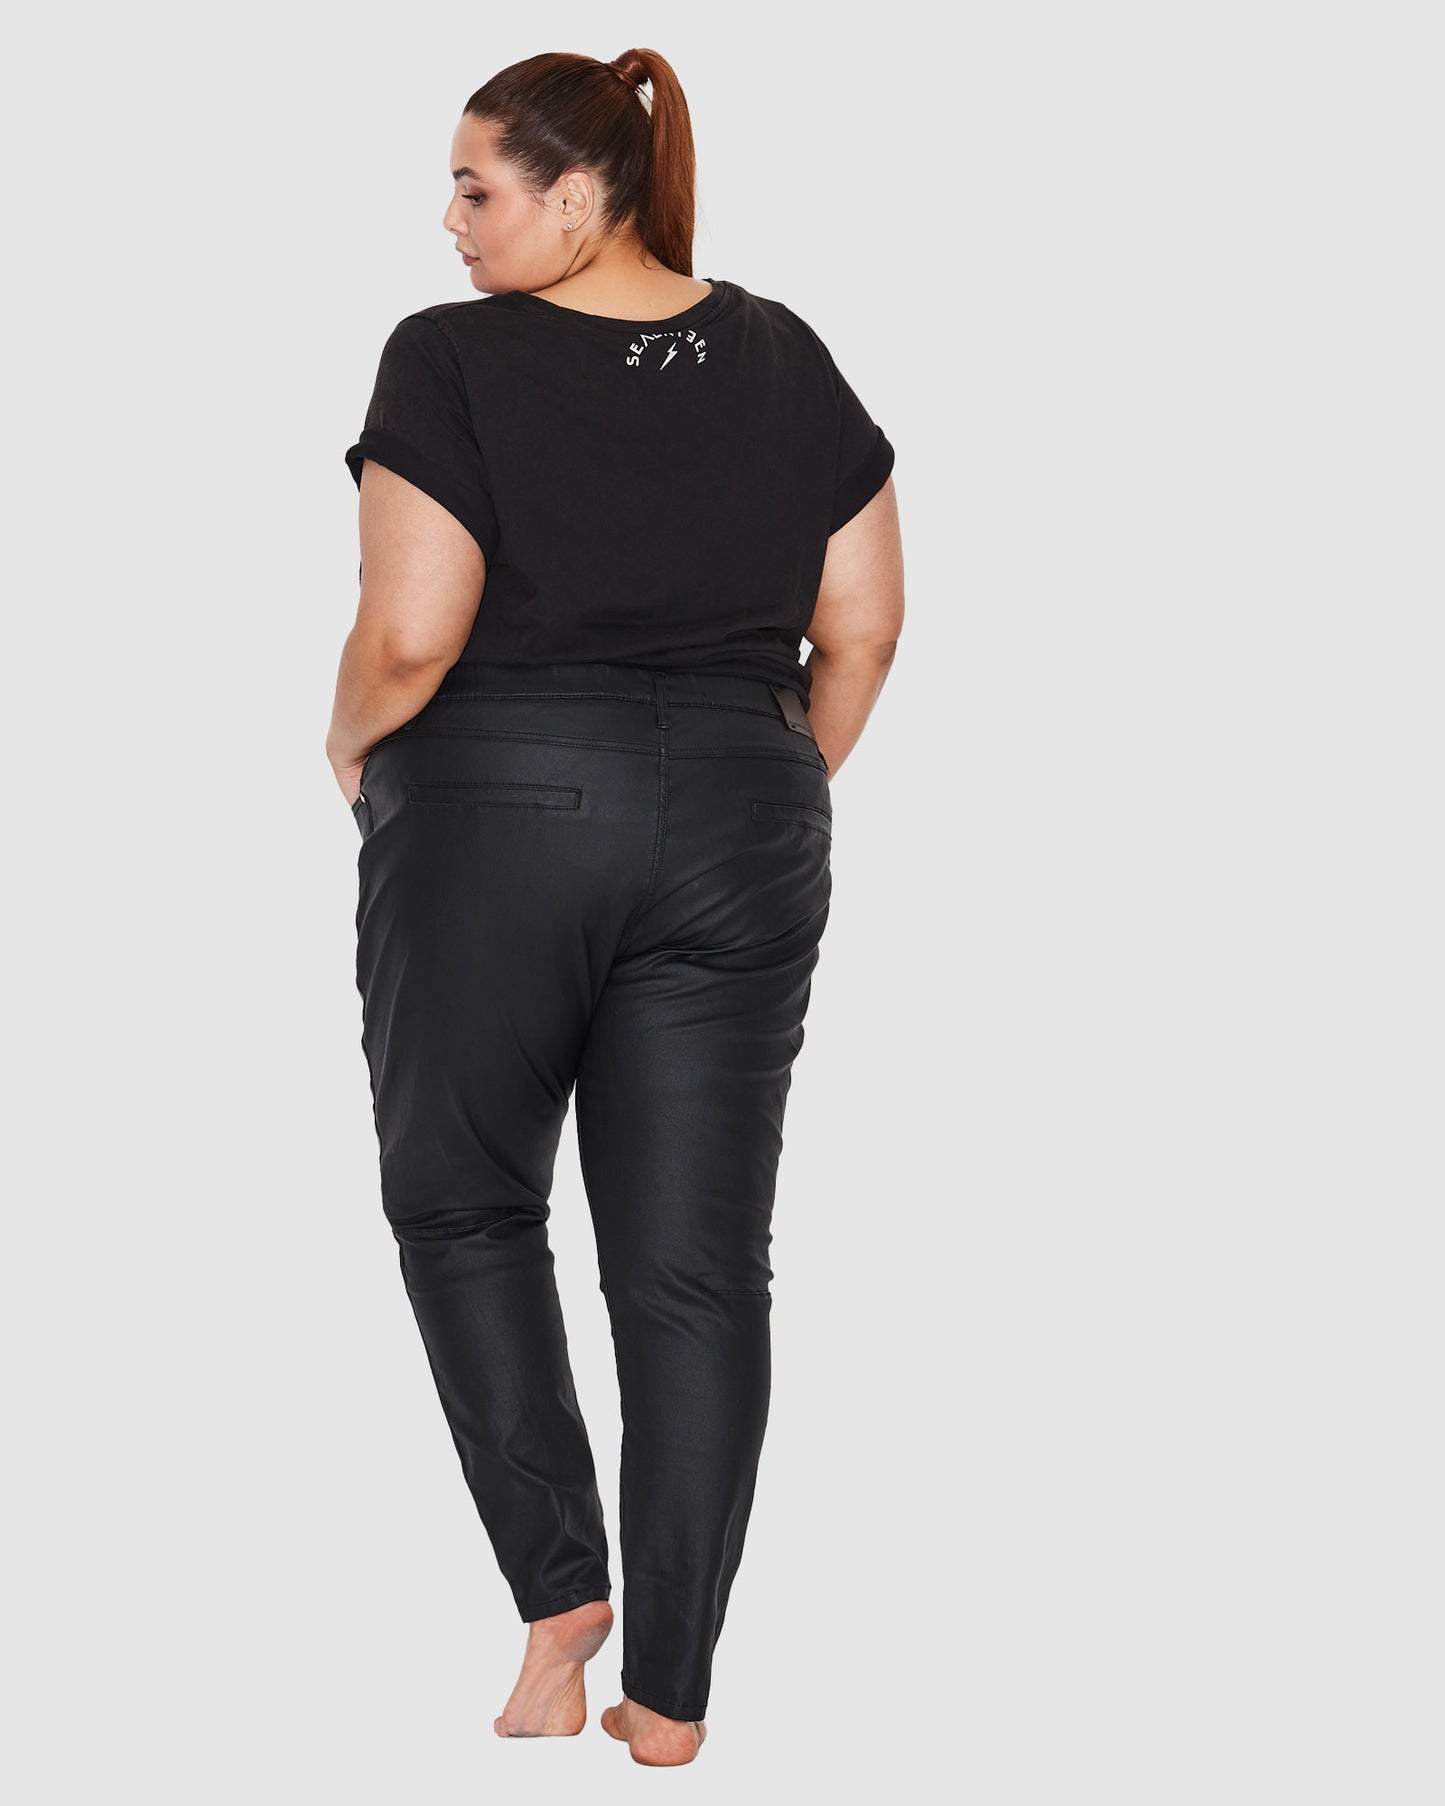 Back view of model wearing plus size black jeans made from coated denim 